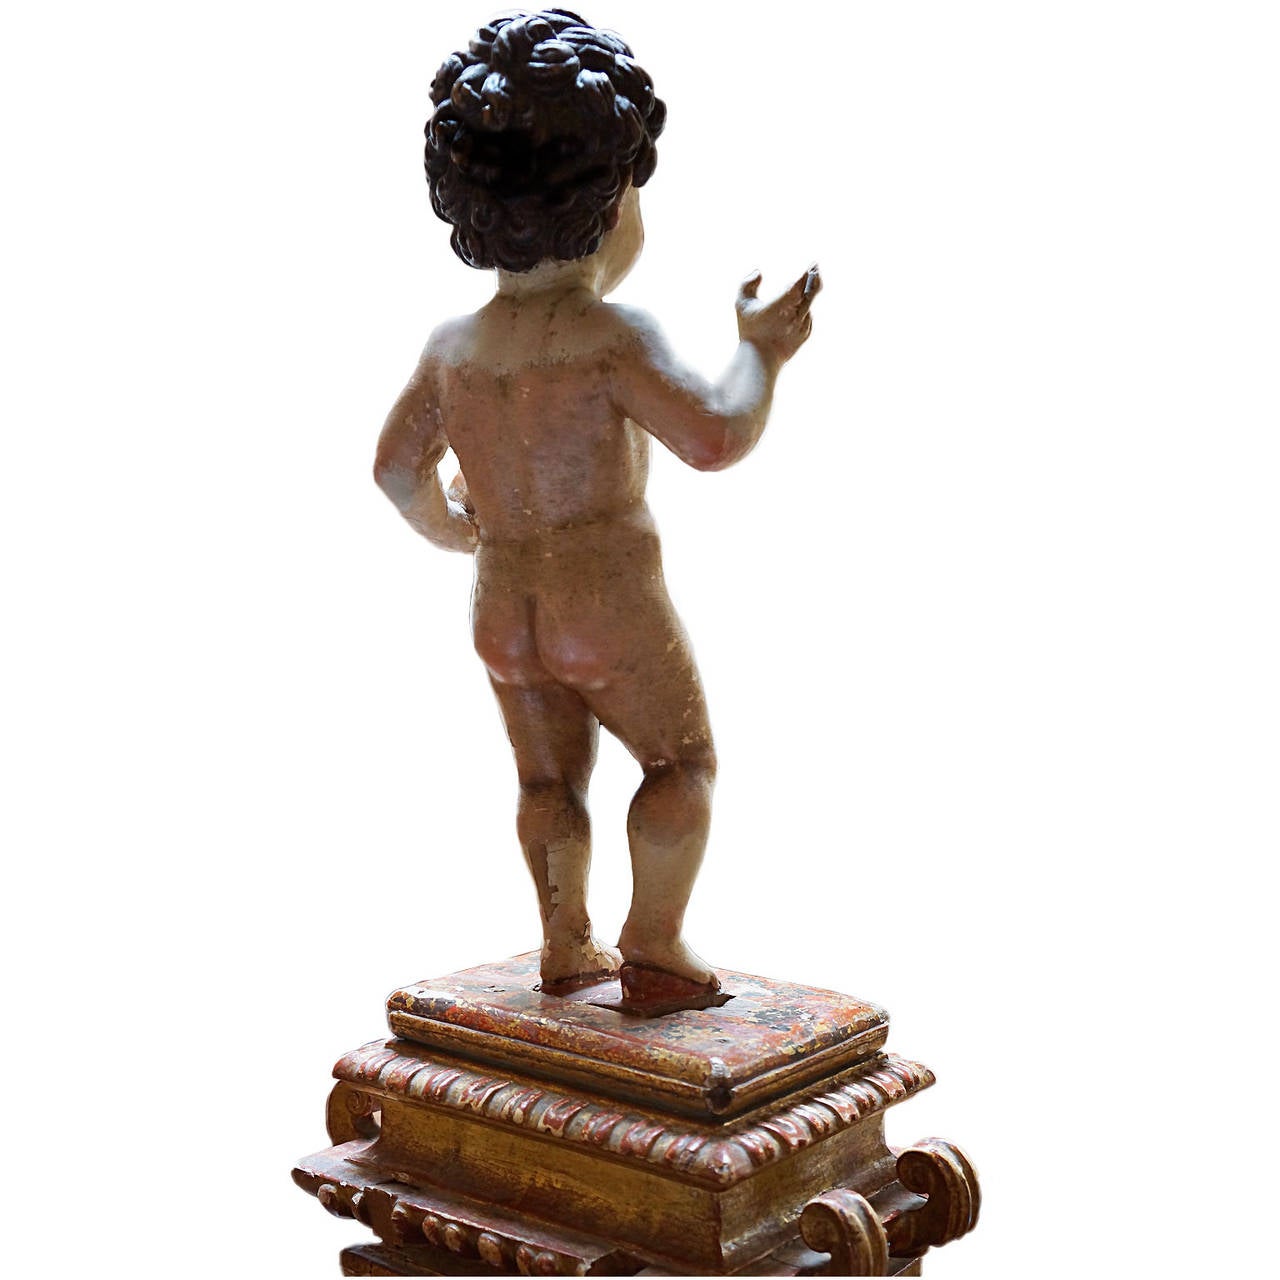 17th c. Italian finely carved wood, gesso, and polychrome Christ child on a wooden gilded carved stand holding the globe in one hand. Exceptional details in hair and face.